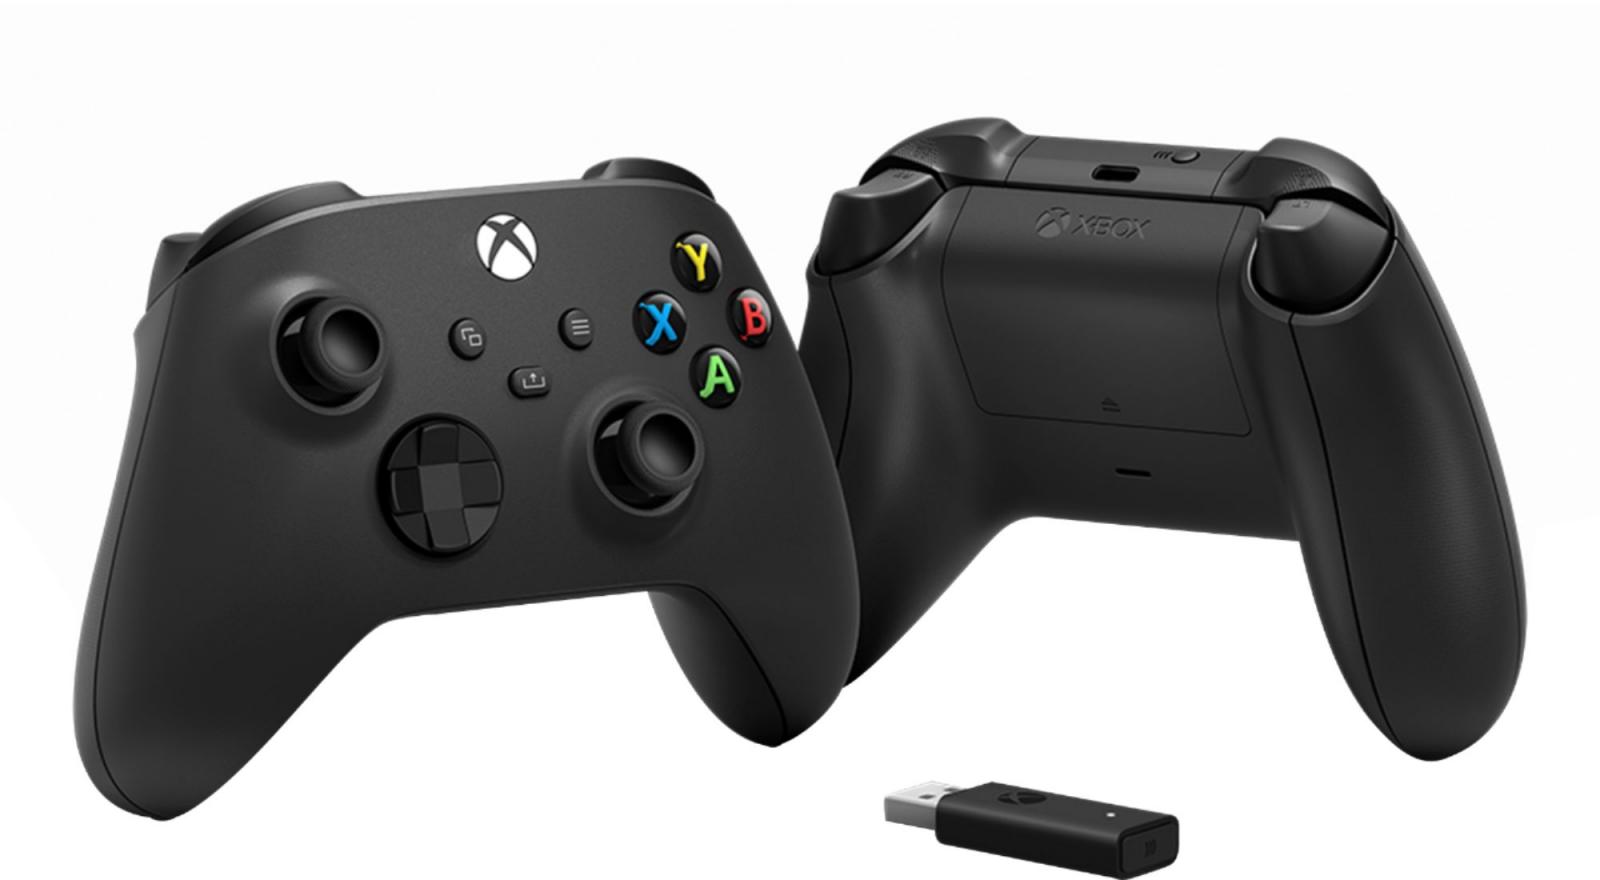 Photo of Xbox Controller + Wireless Adapter for Windows